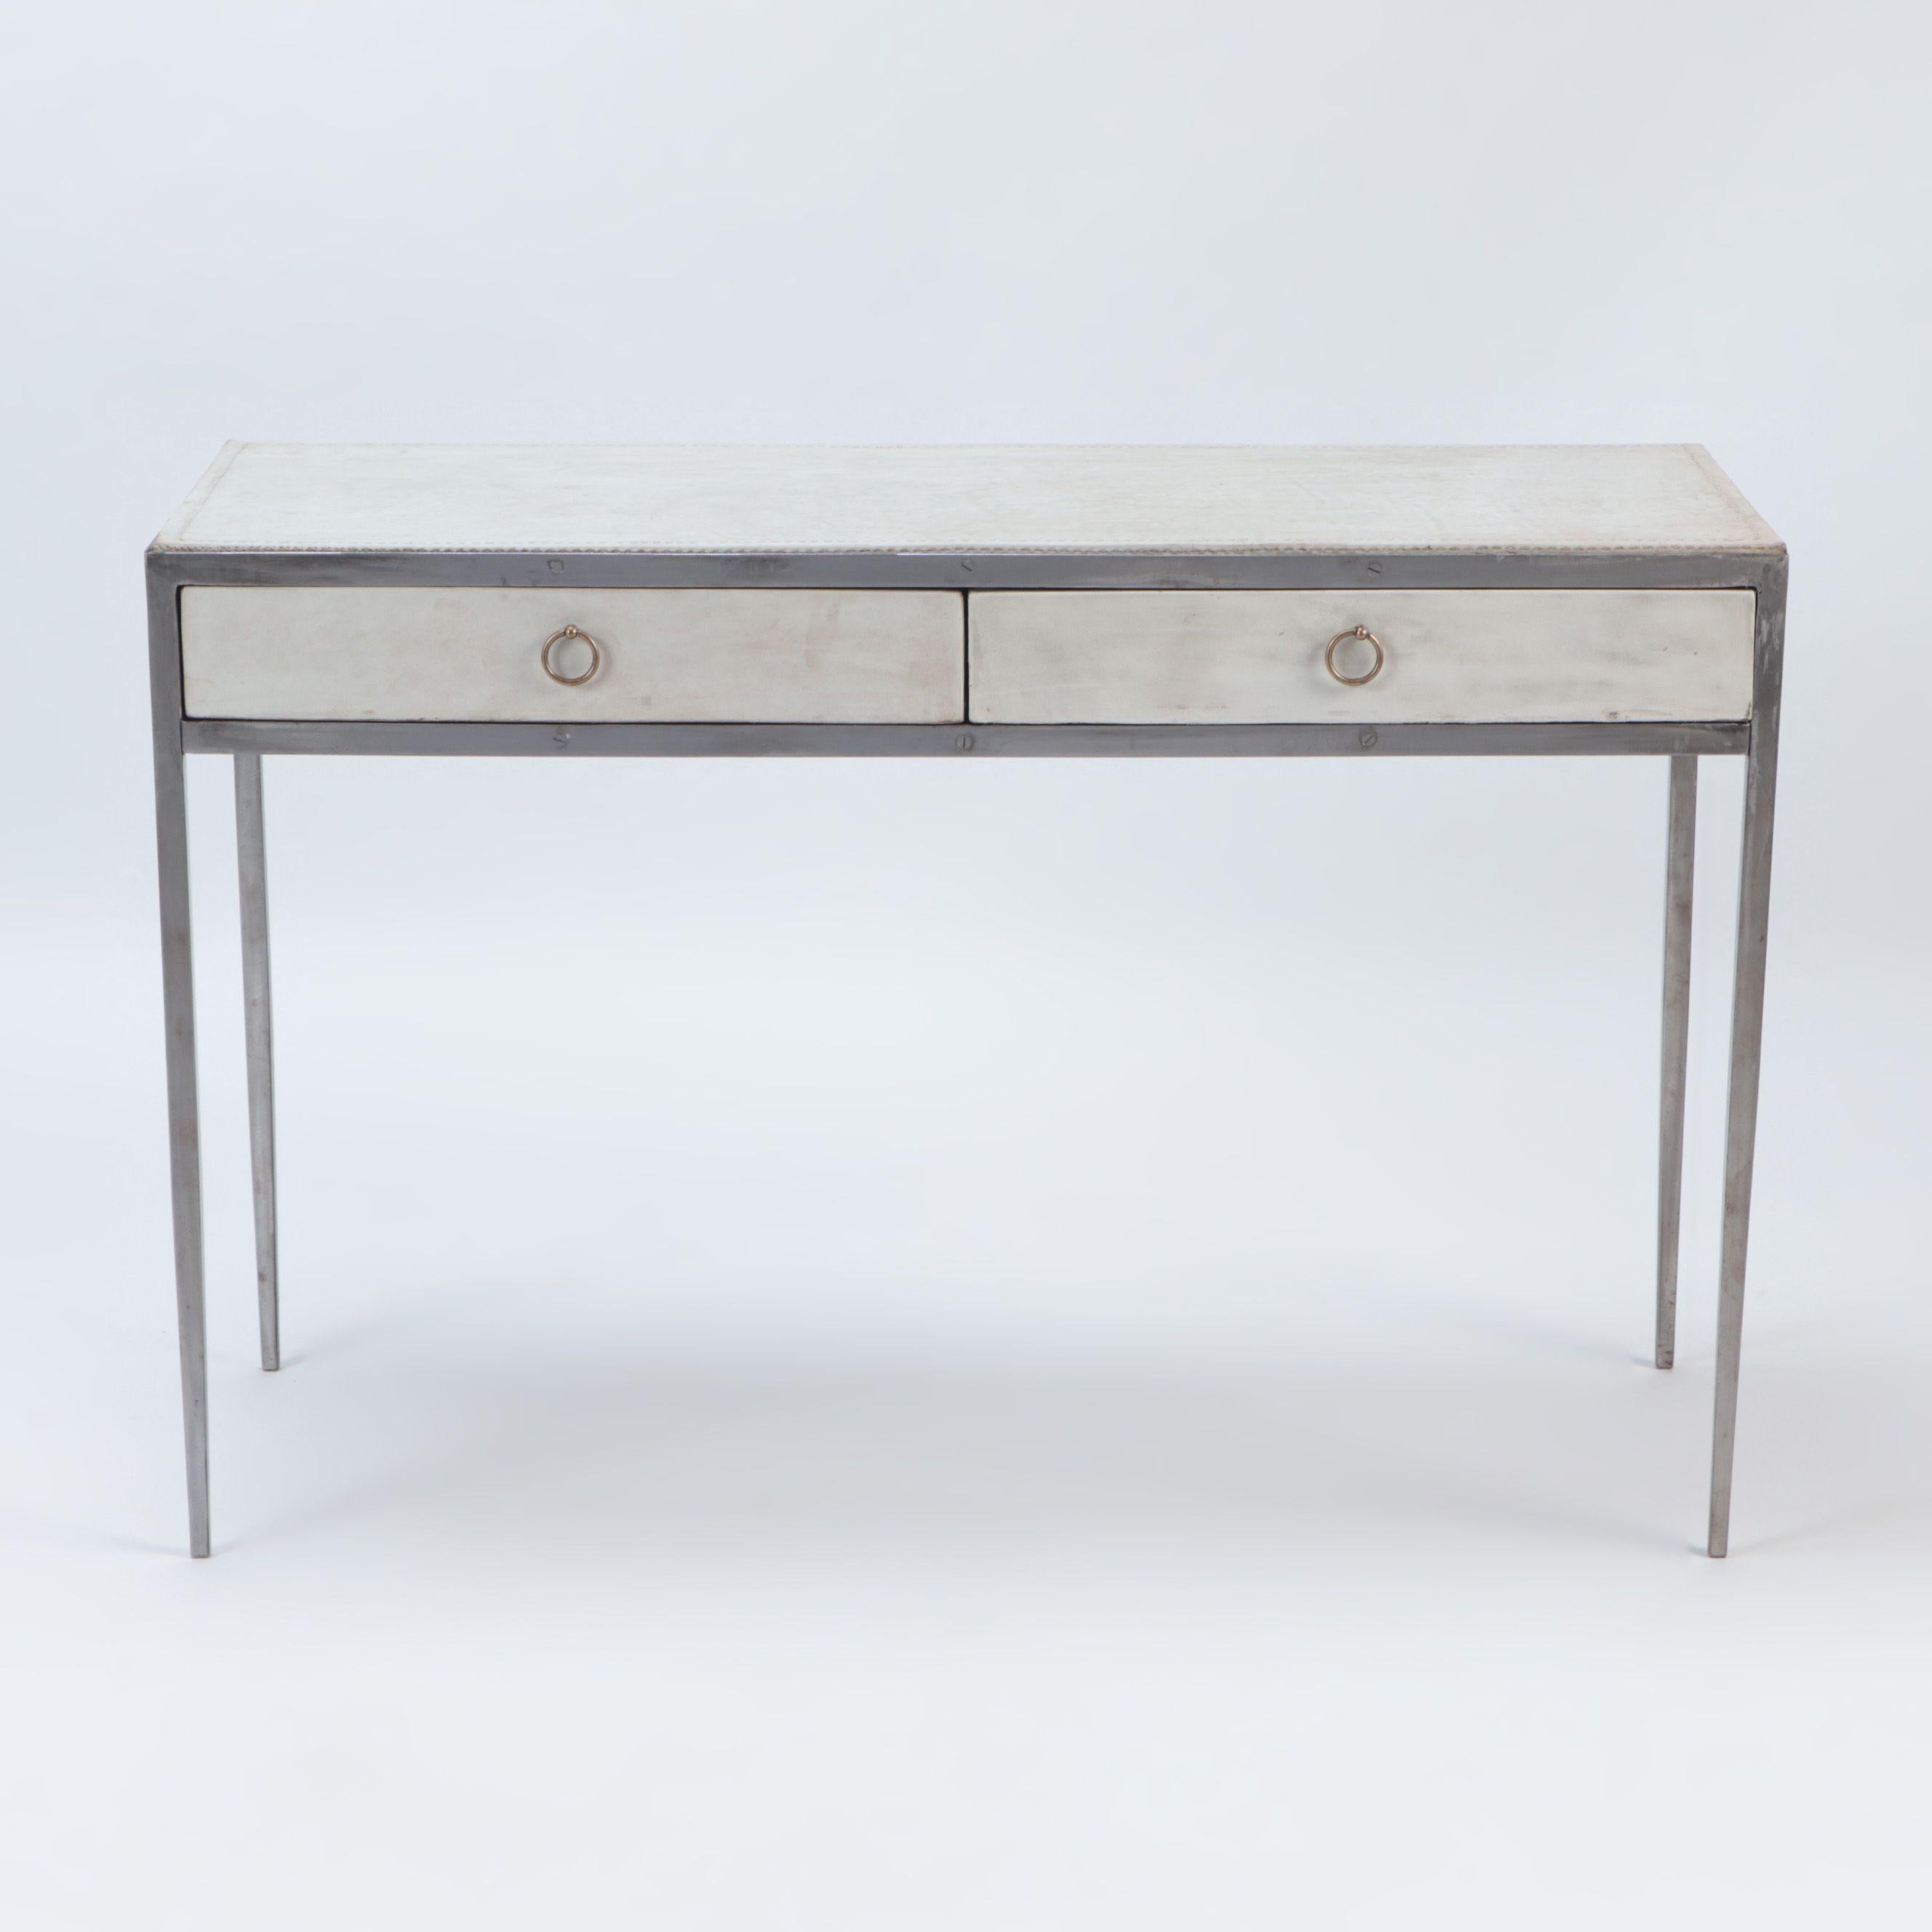 An iron and parchemnt desk in the manner of Jean-Michel Frank, contemporary.